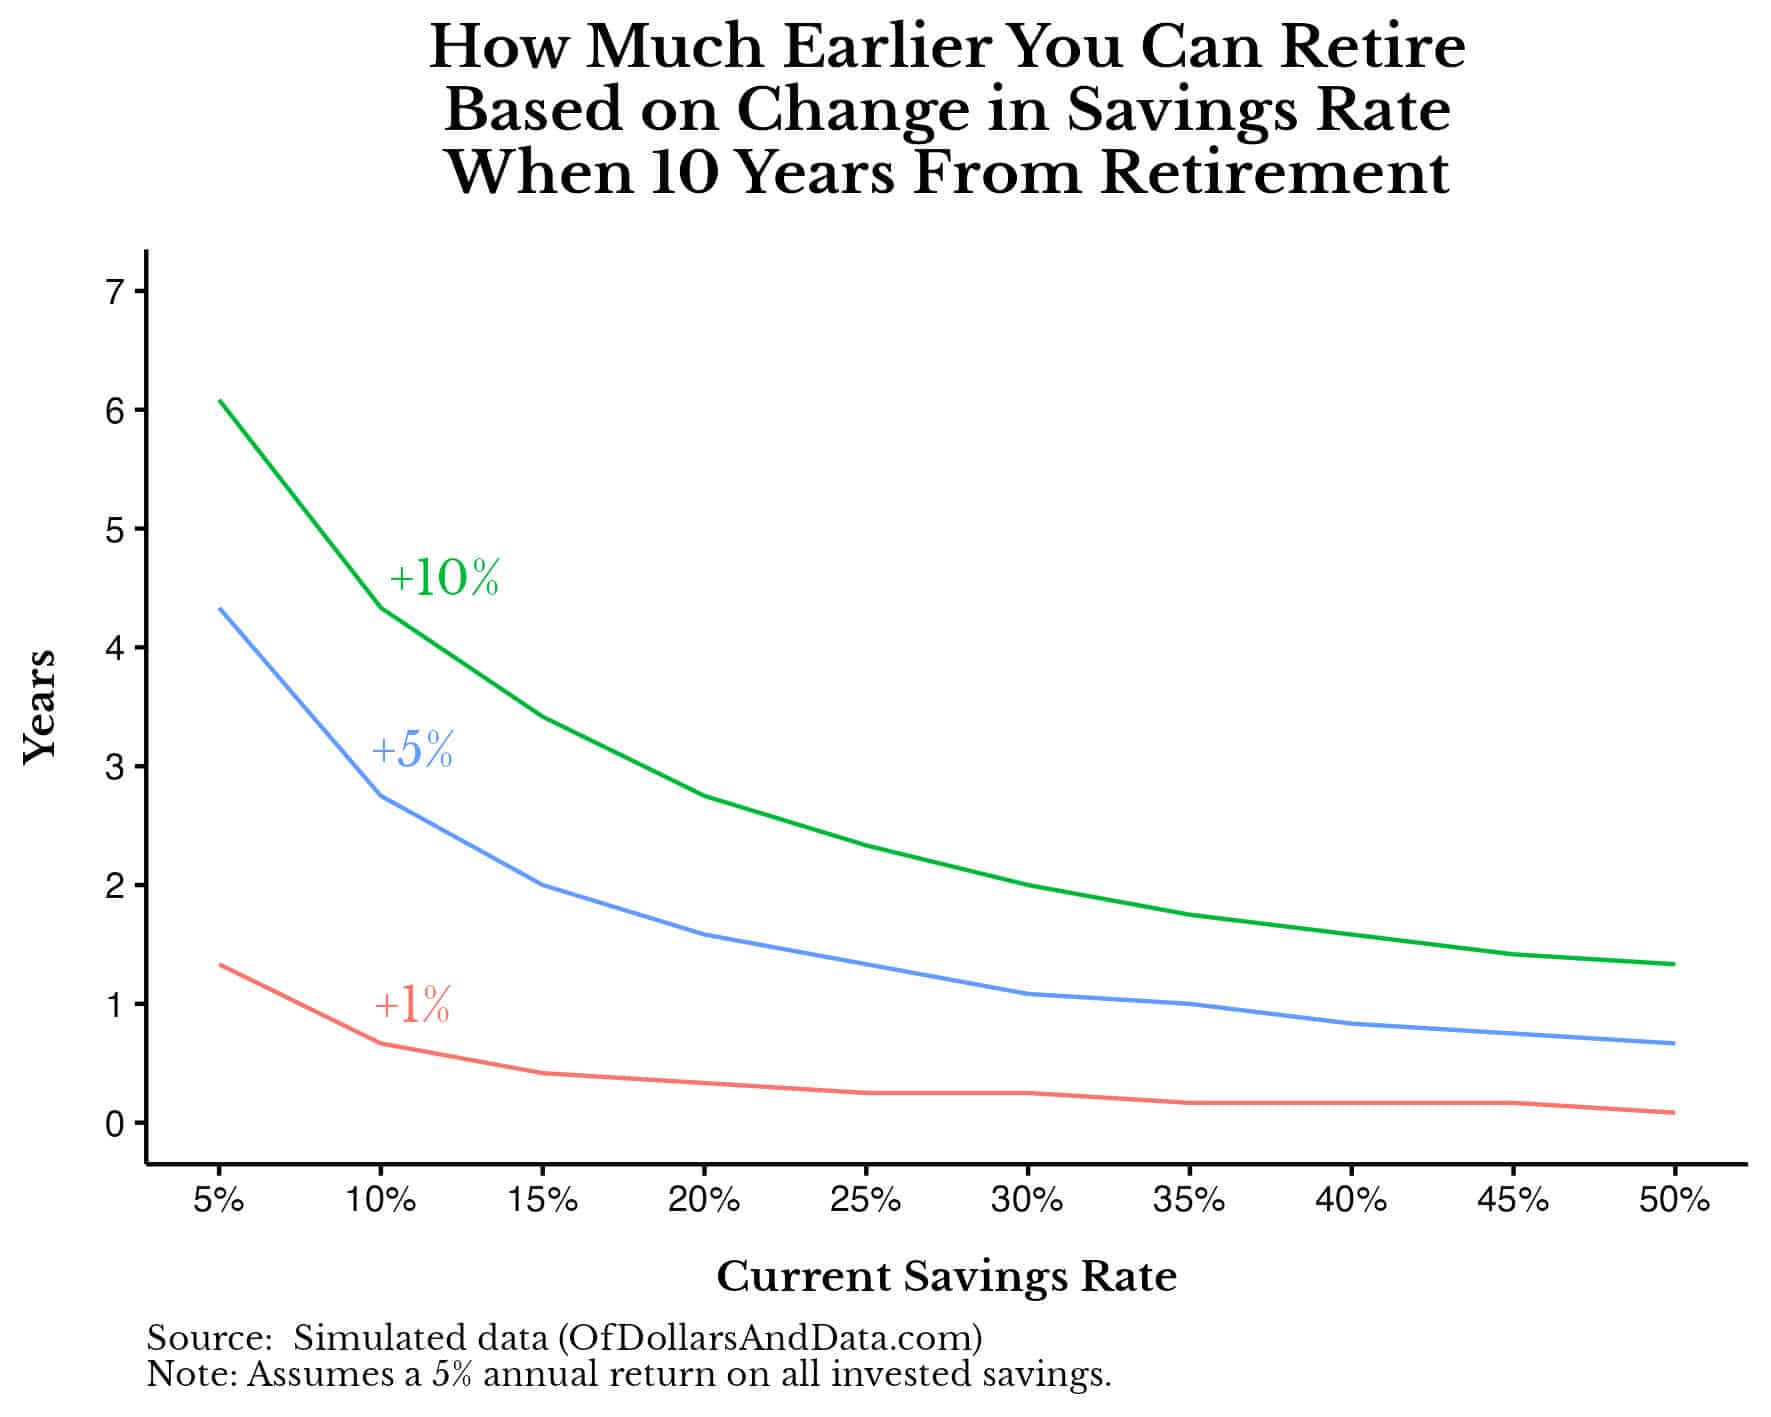 Chart showing how much earlier you can retire based on the change in your savings rate when 10 years from retirement.